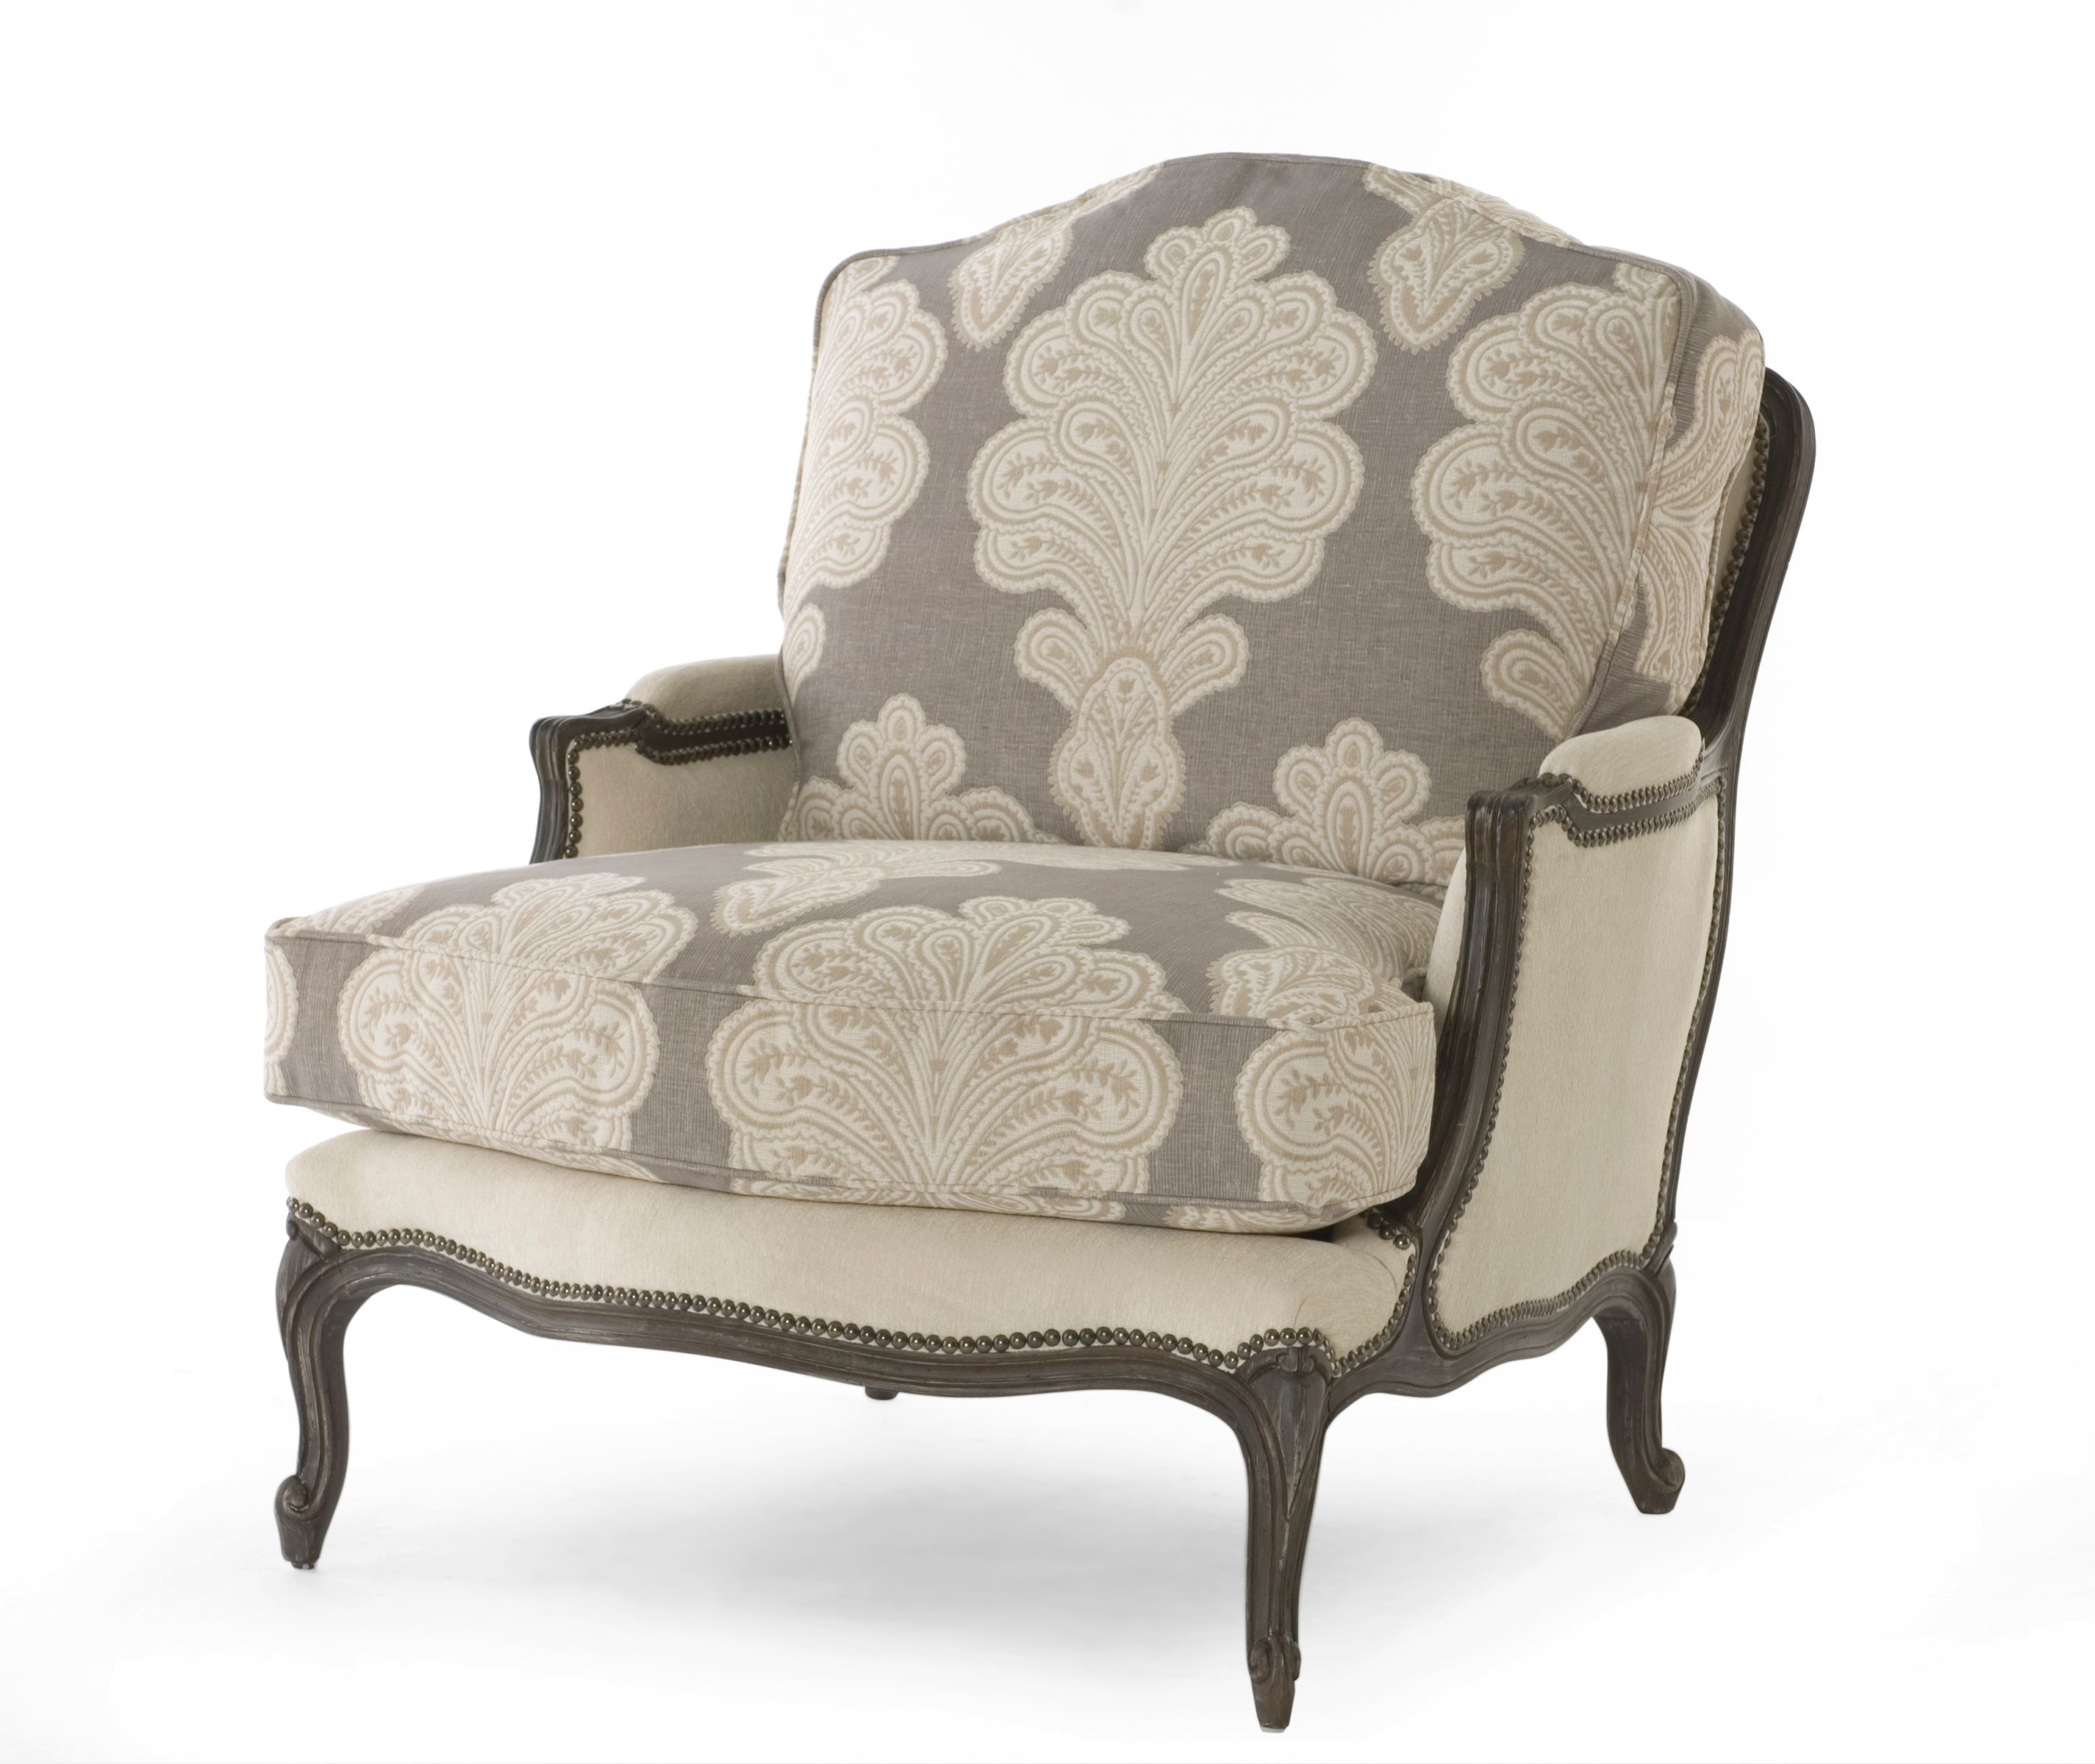 Elegance Bergere Chair (View 7 of 7)